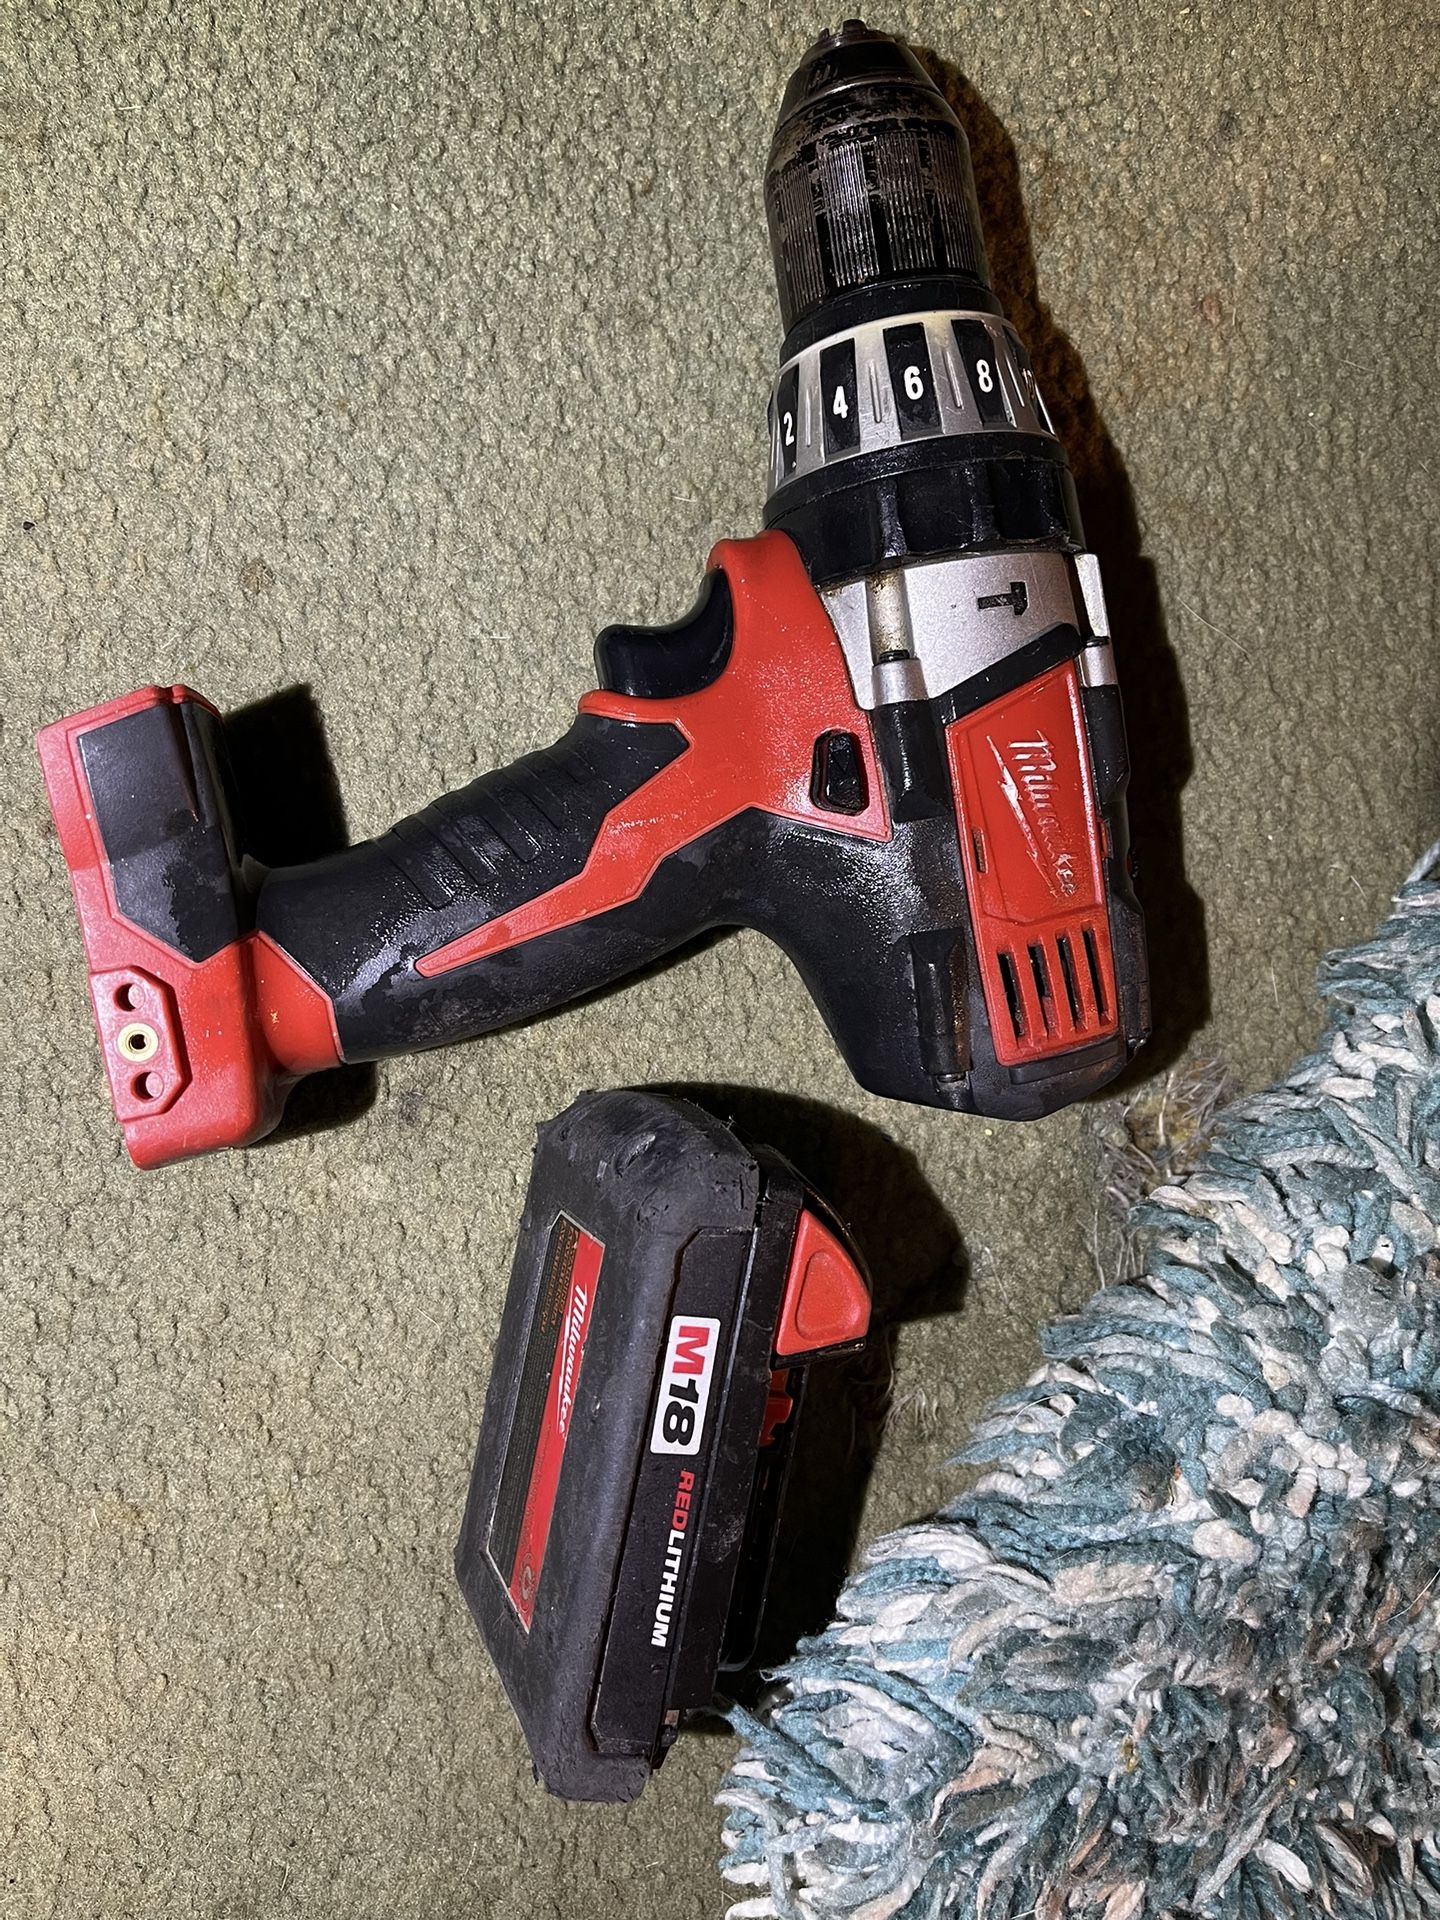 Milwaukee, 18 V hammer drill with battery